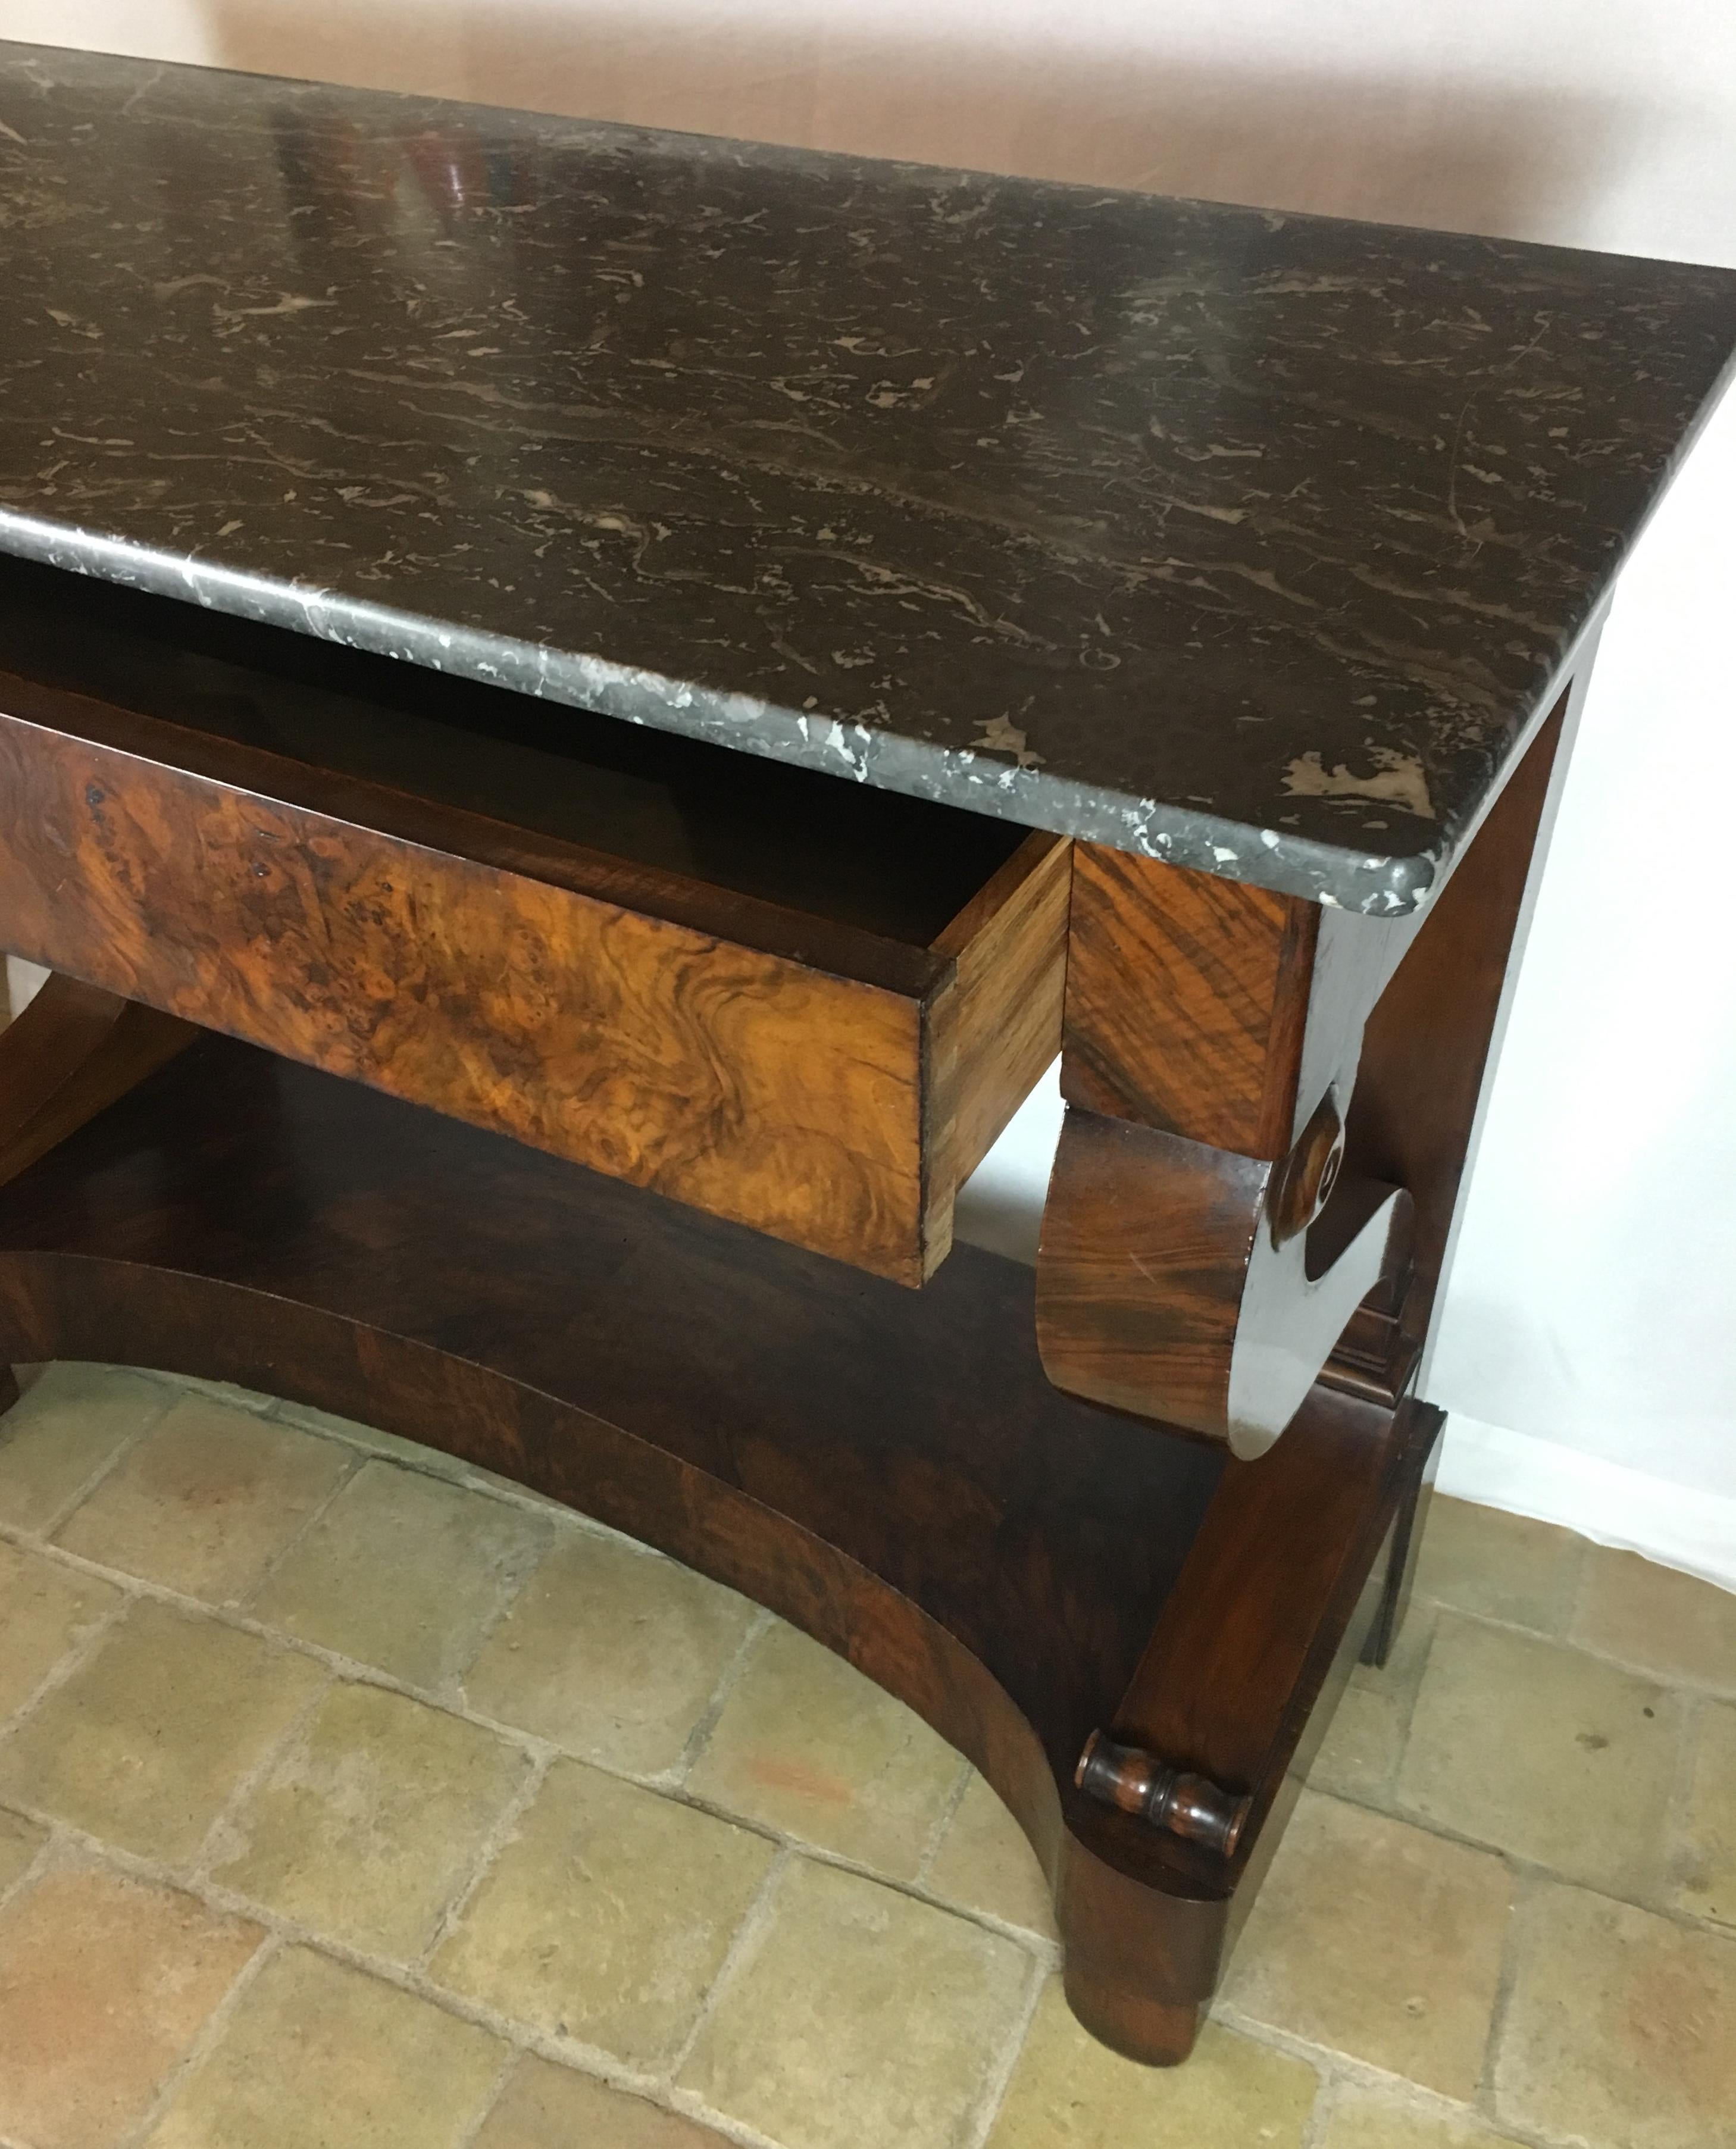 A 19th century French flamed walnut Louis-Philippe/Restoration period console table with a rectangular variegated grey marble top and pull-out drawer. 

This elegant piece rests on tapered front legs and straight rear legs joined by a rectangular